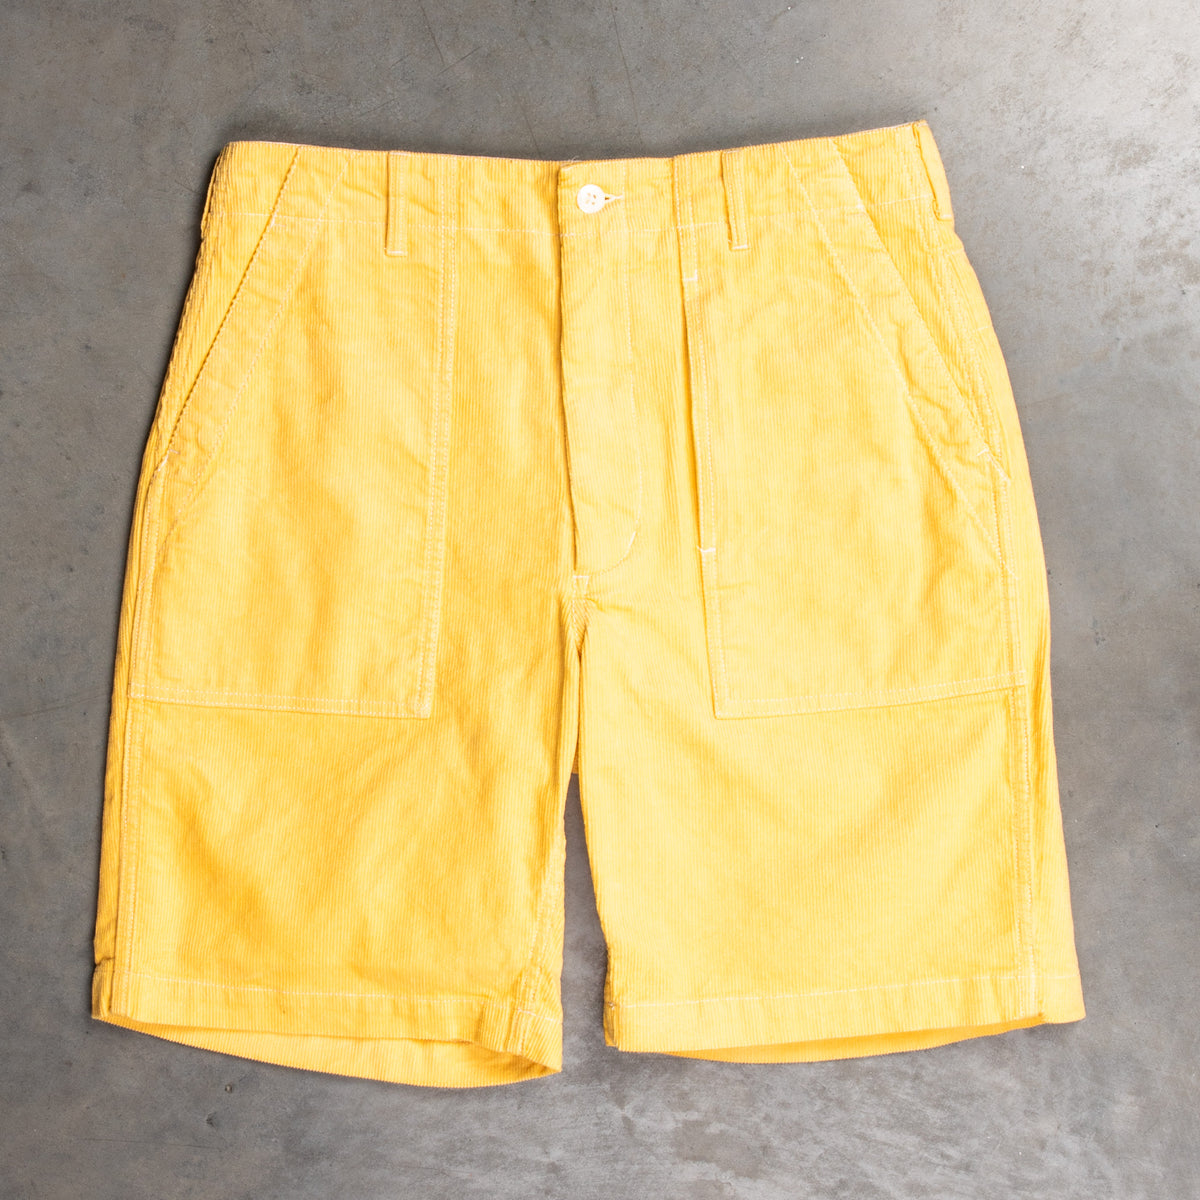 CENTUKE Pastel Yellow Solid Color Men's Running Shorts with